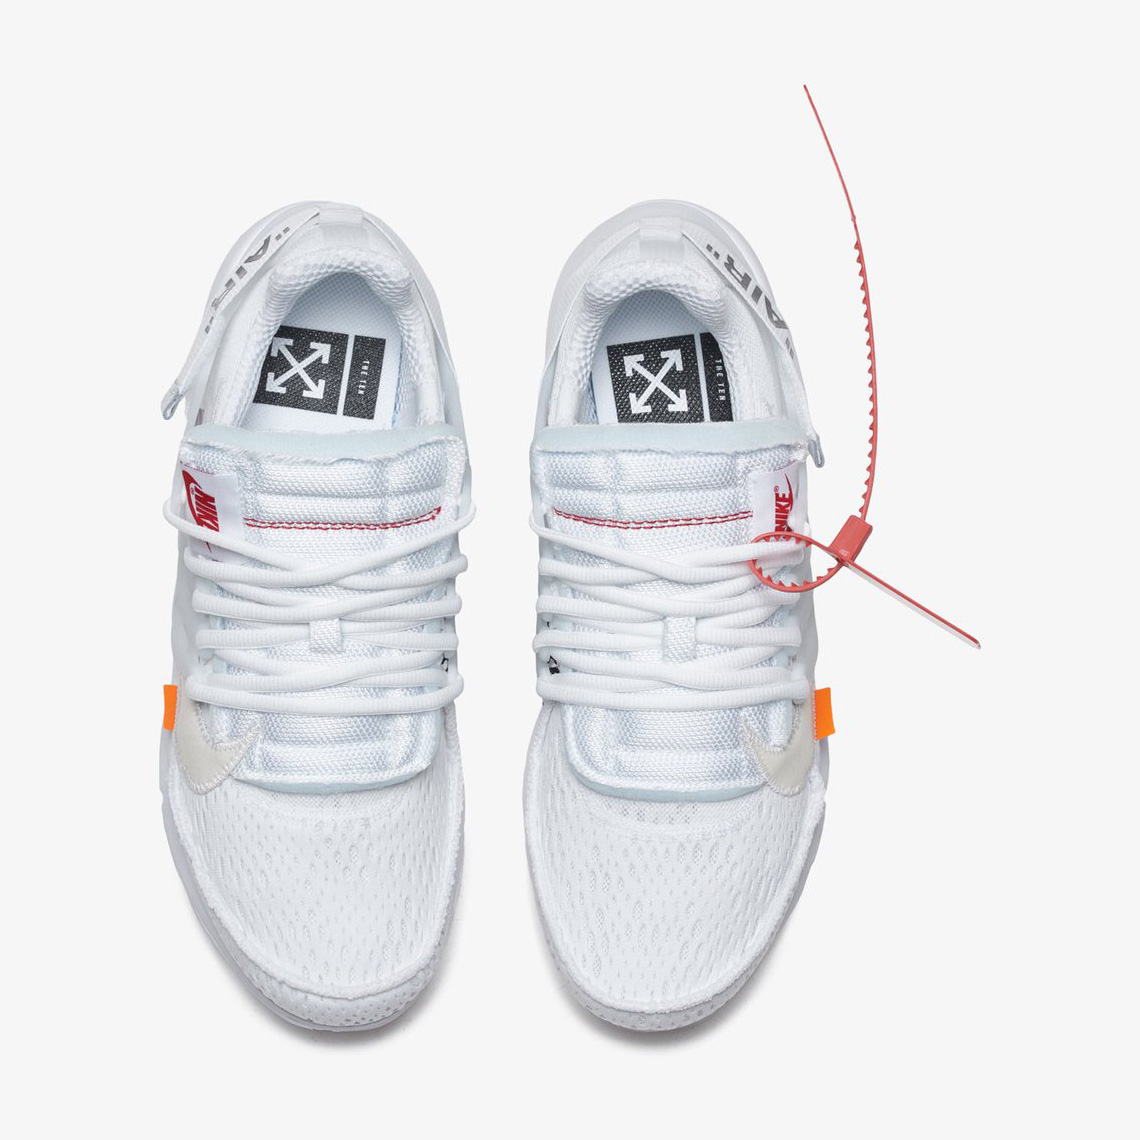 Off White Nike Presto White Official Images Aa3830 100 2